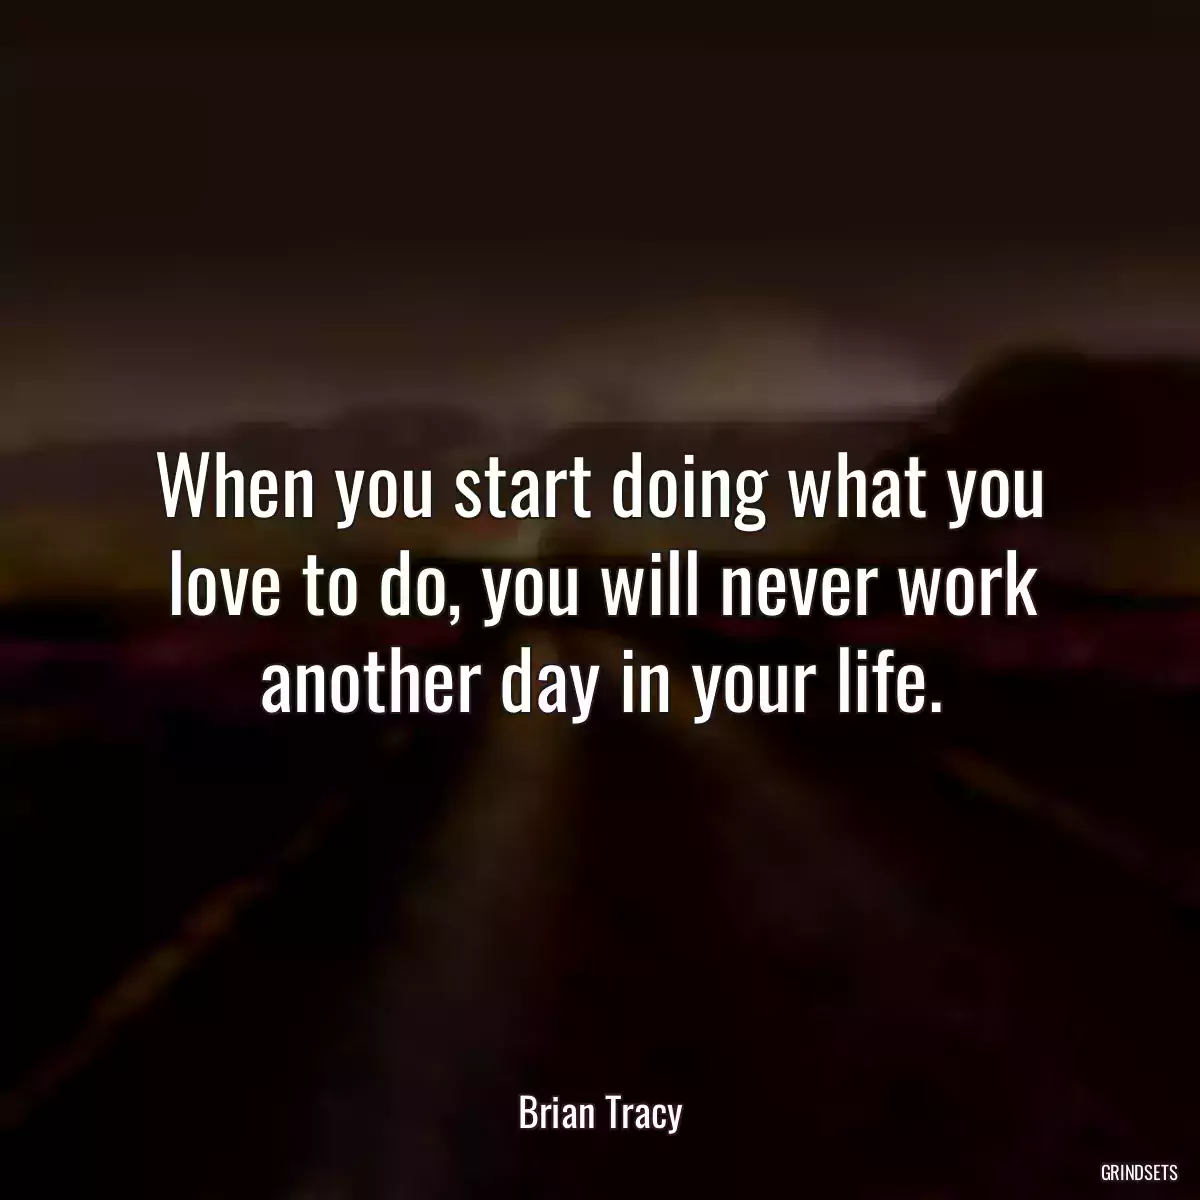 When you start doing what you love to do, you will never work another day in your life.